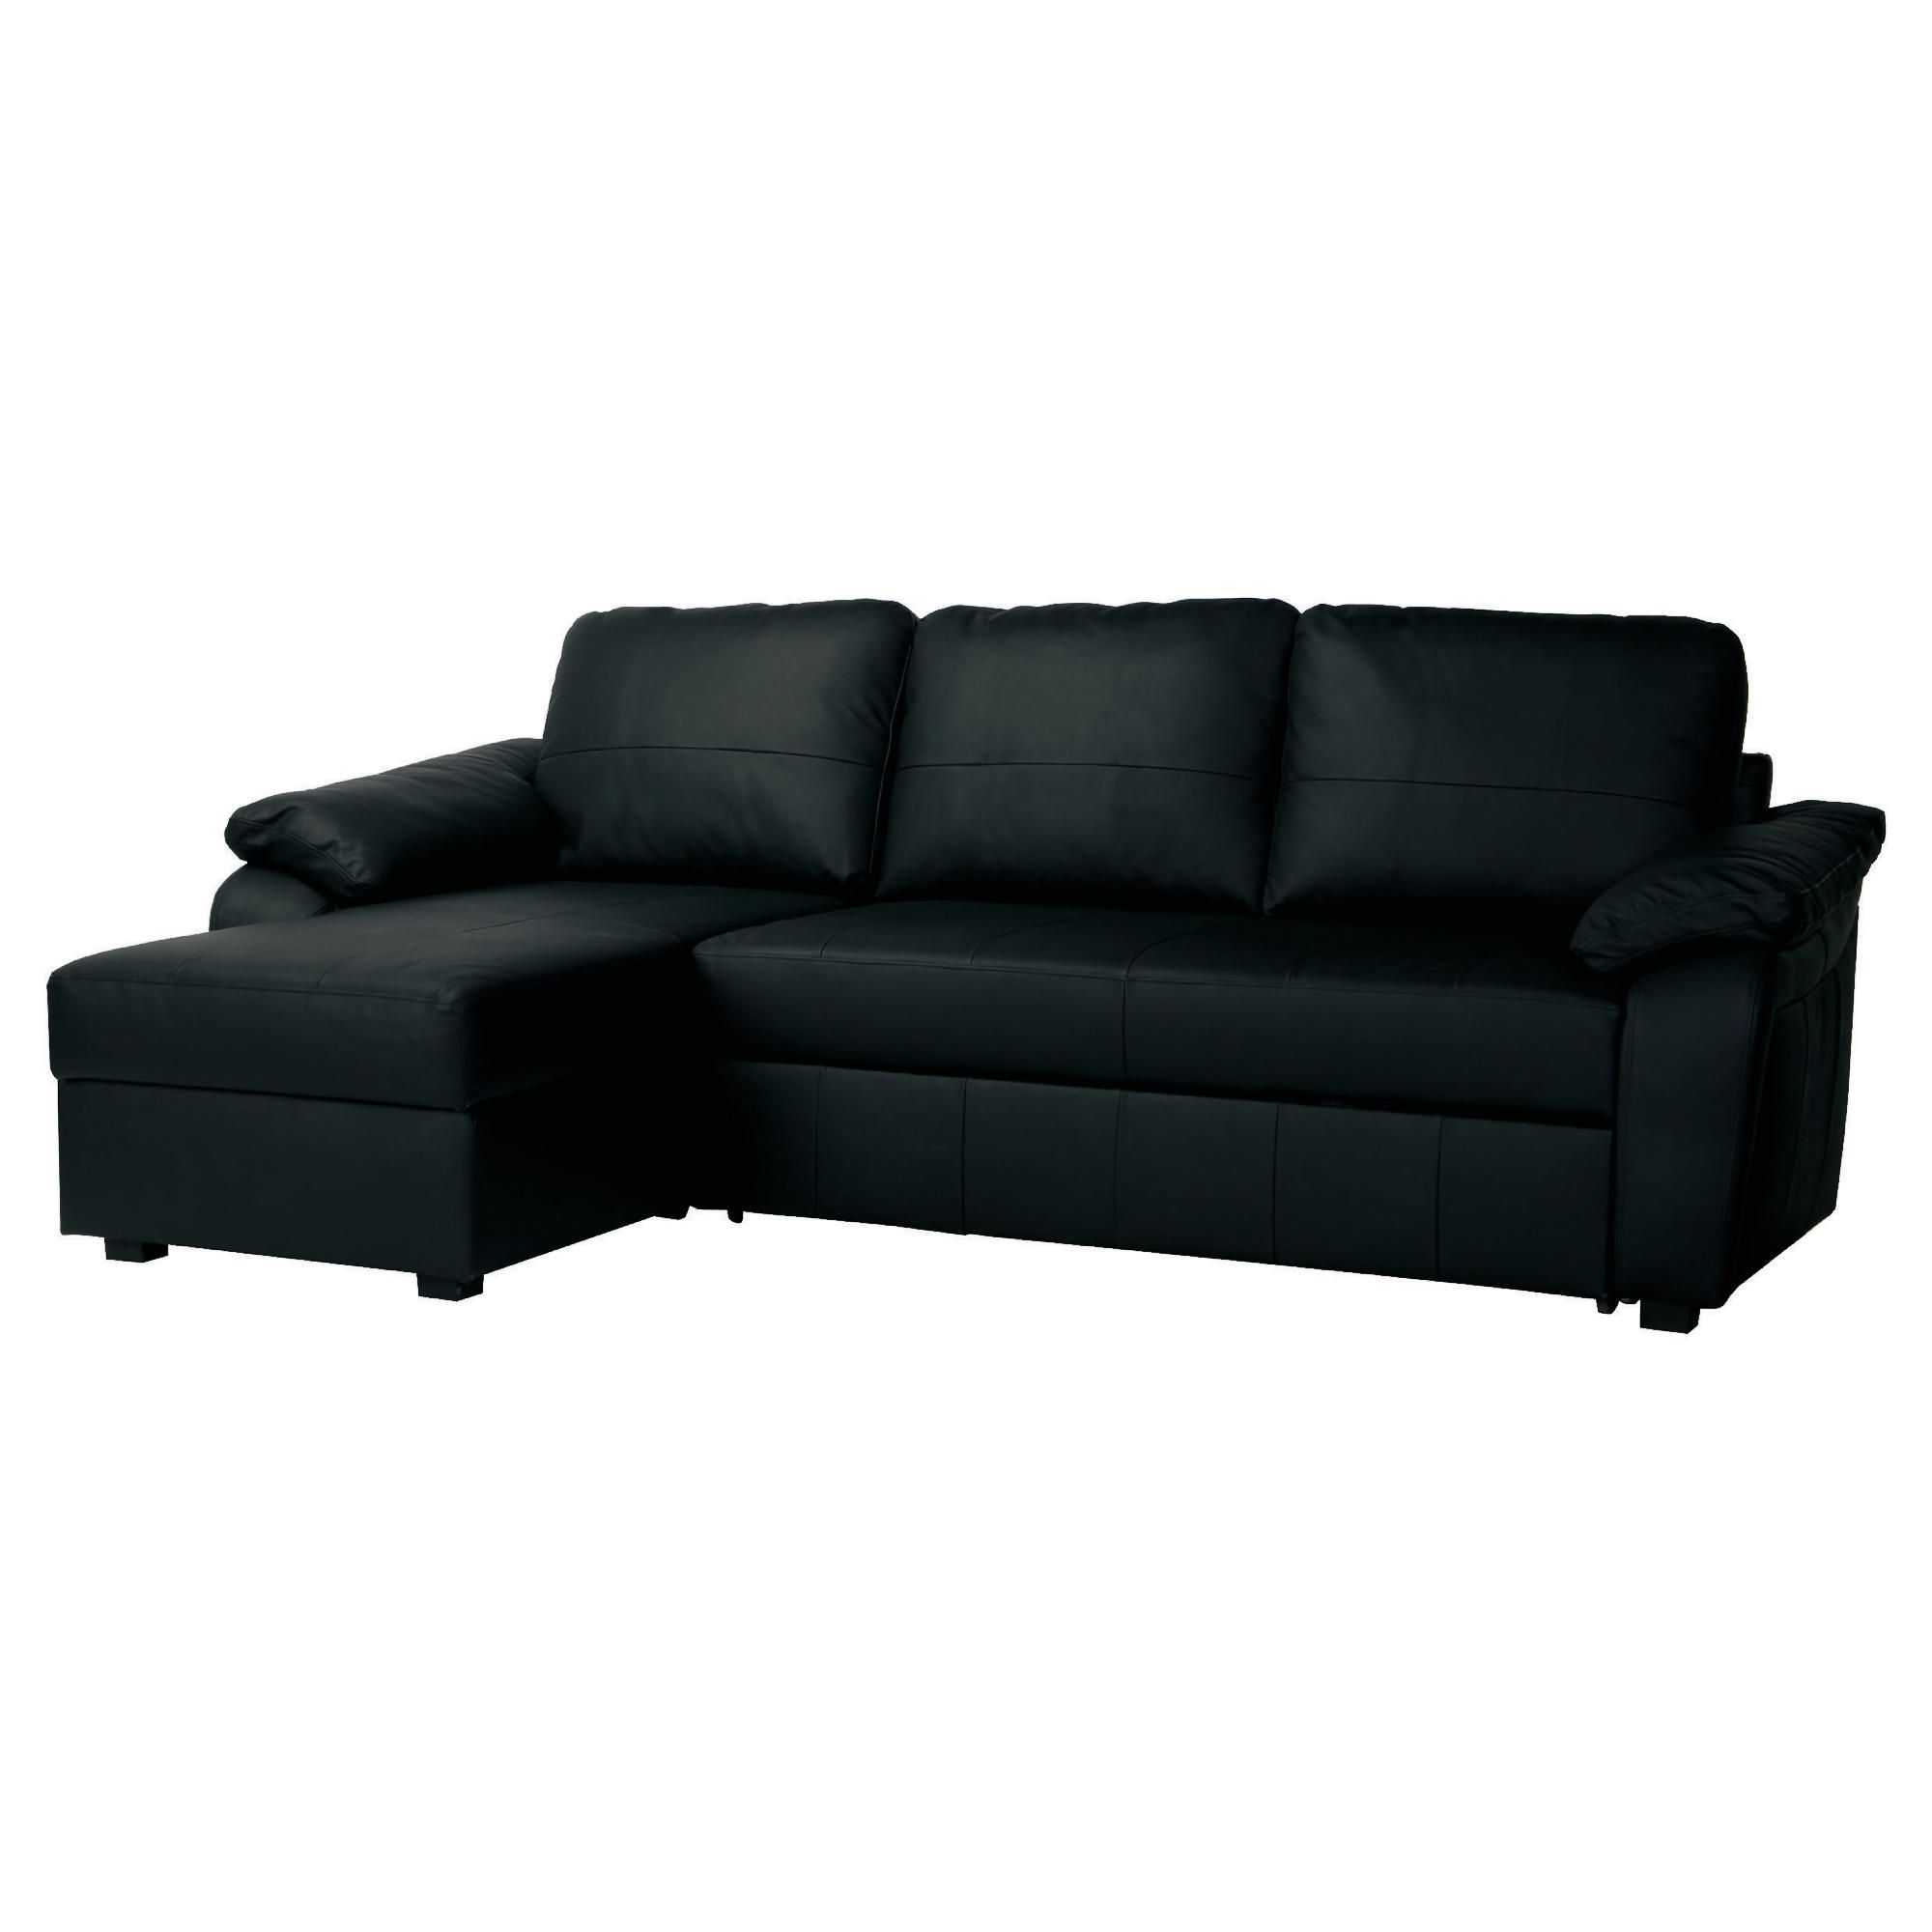 Ashmore Leather Corner Chaise Sofabed Black Left Hand Facing at Tesco Direct